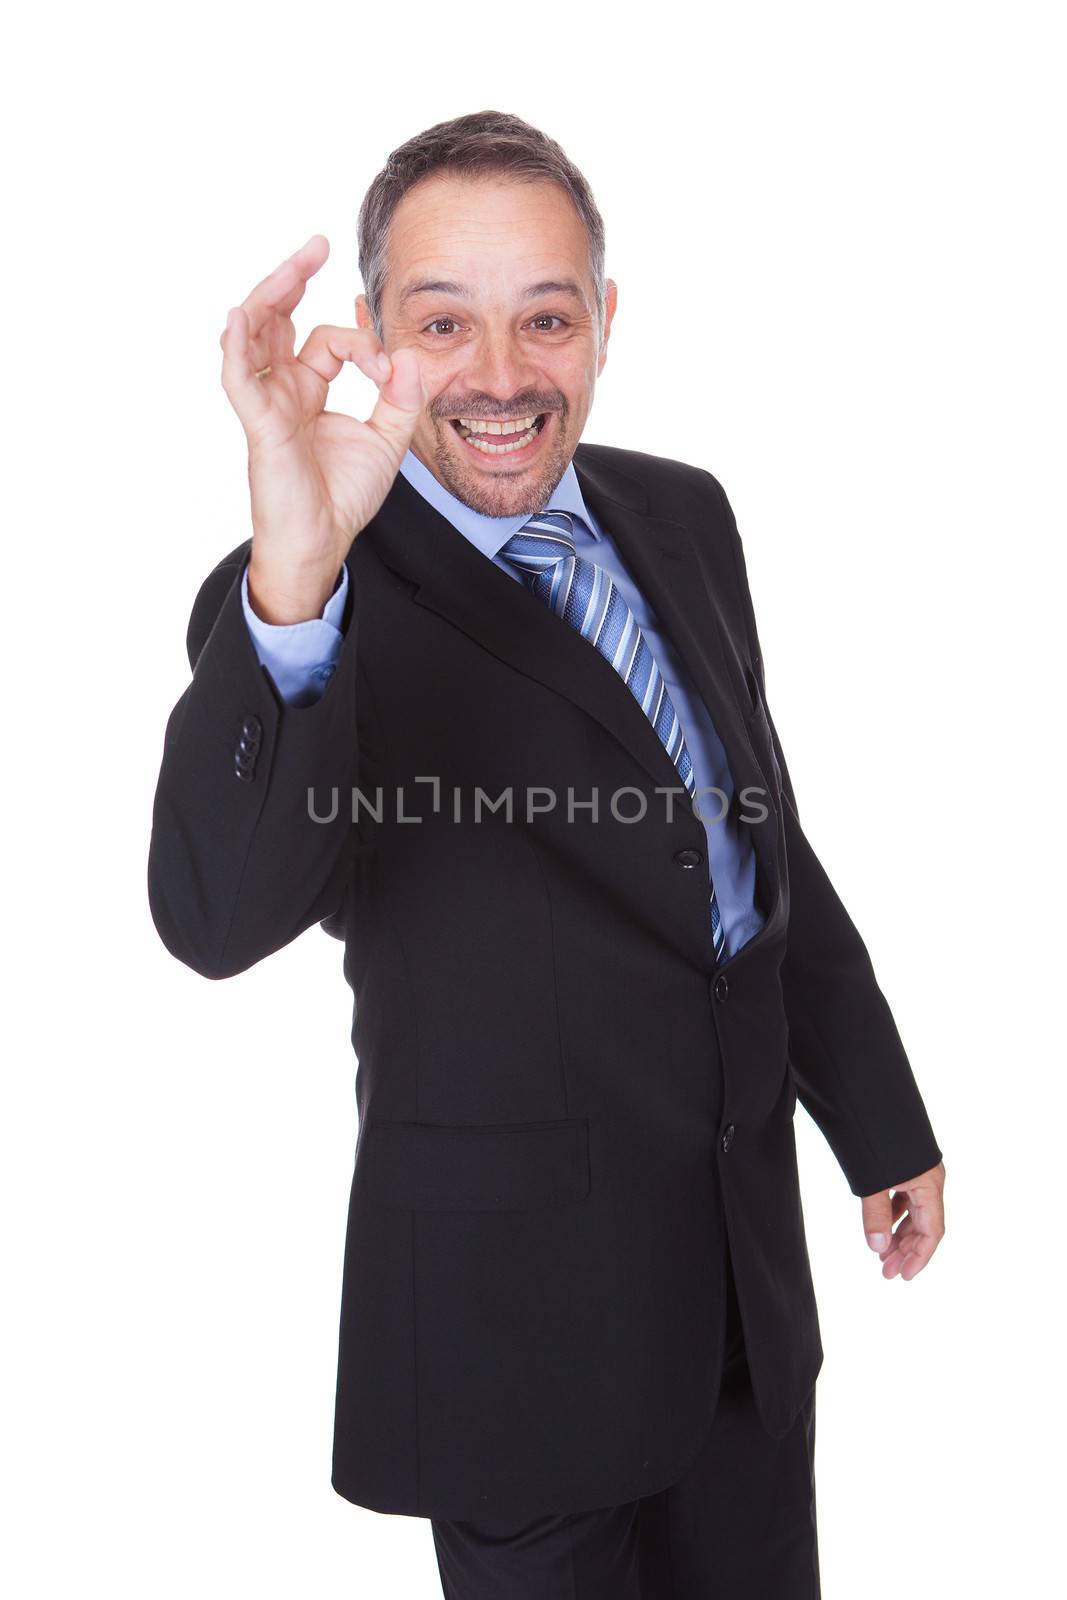 Happy Businessman With Thumbs Up Isolated On White Background